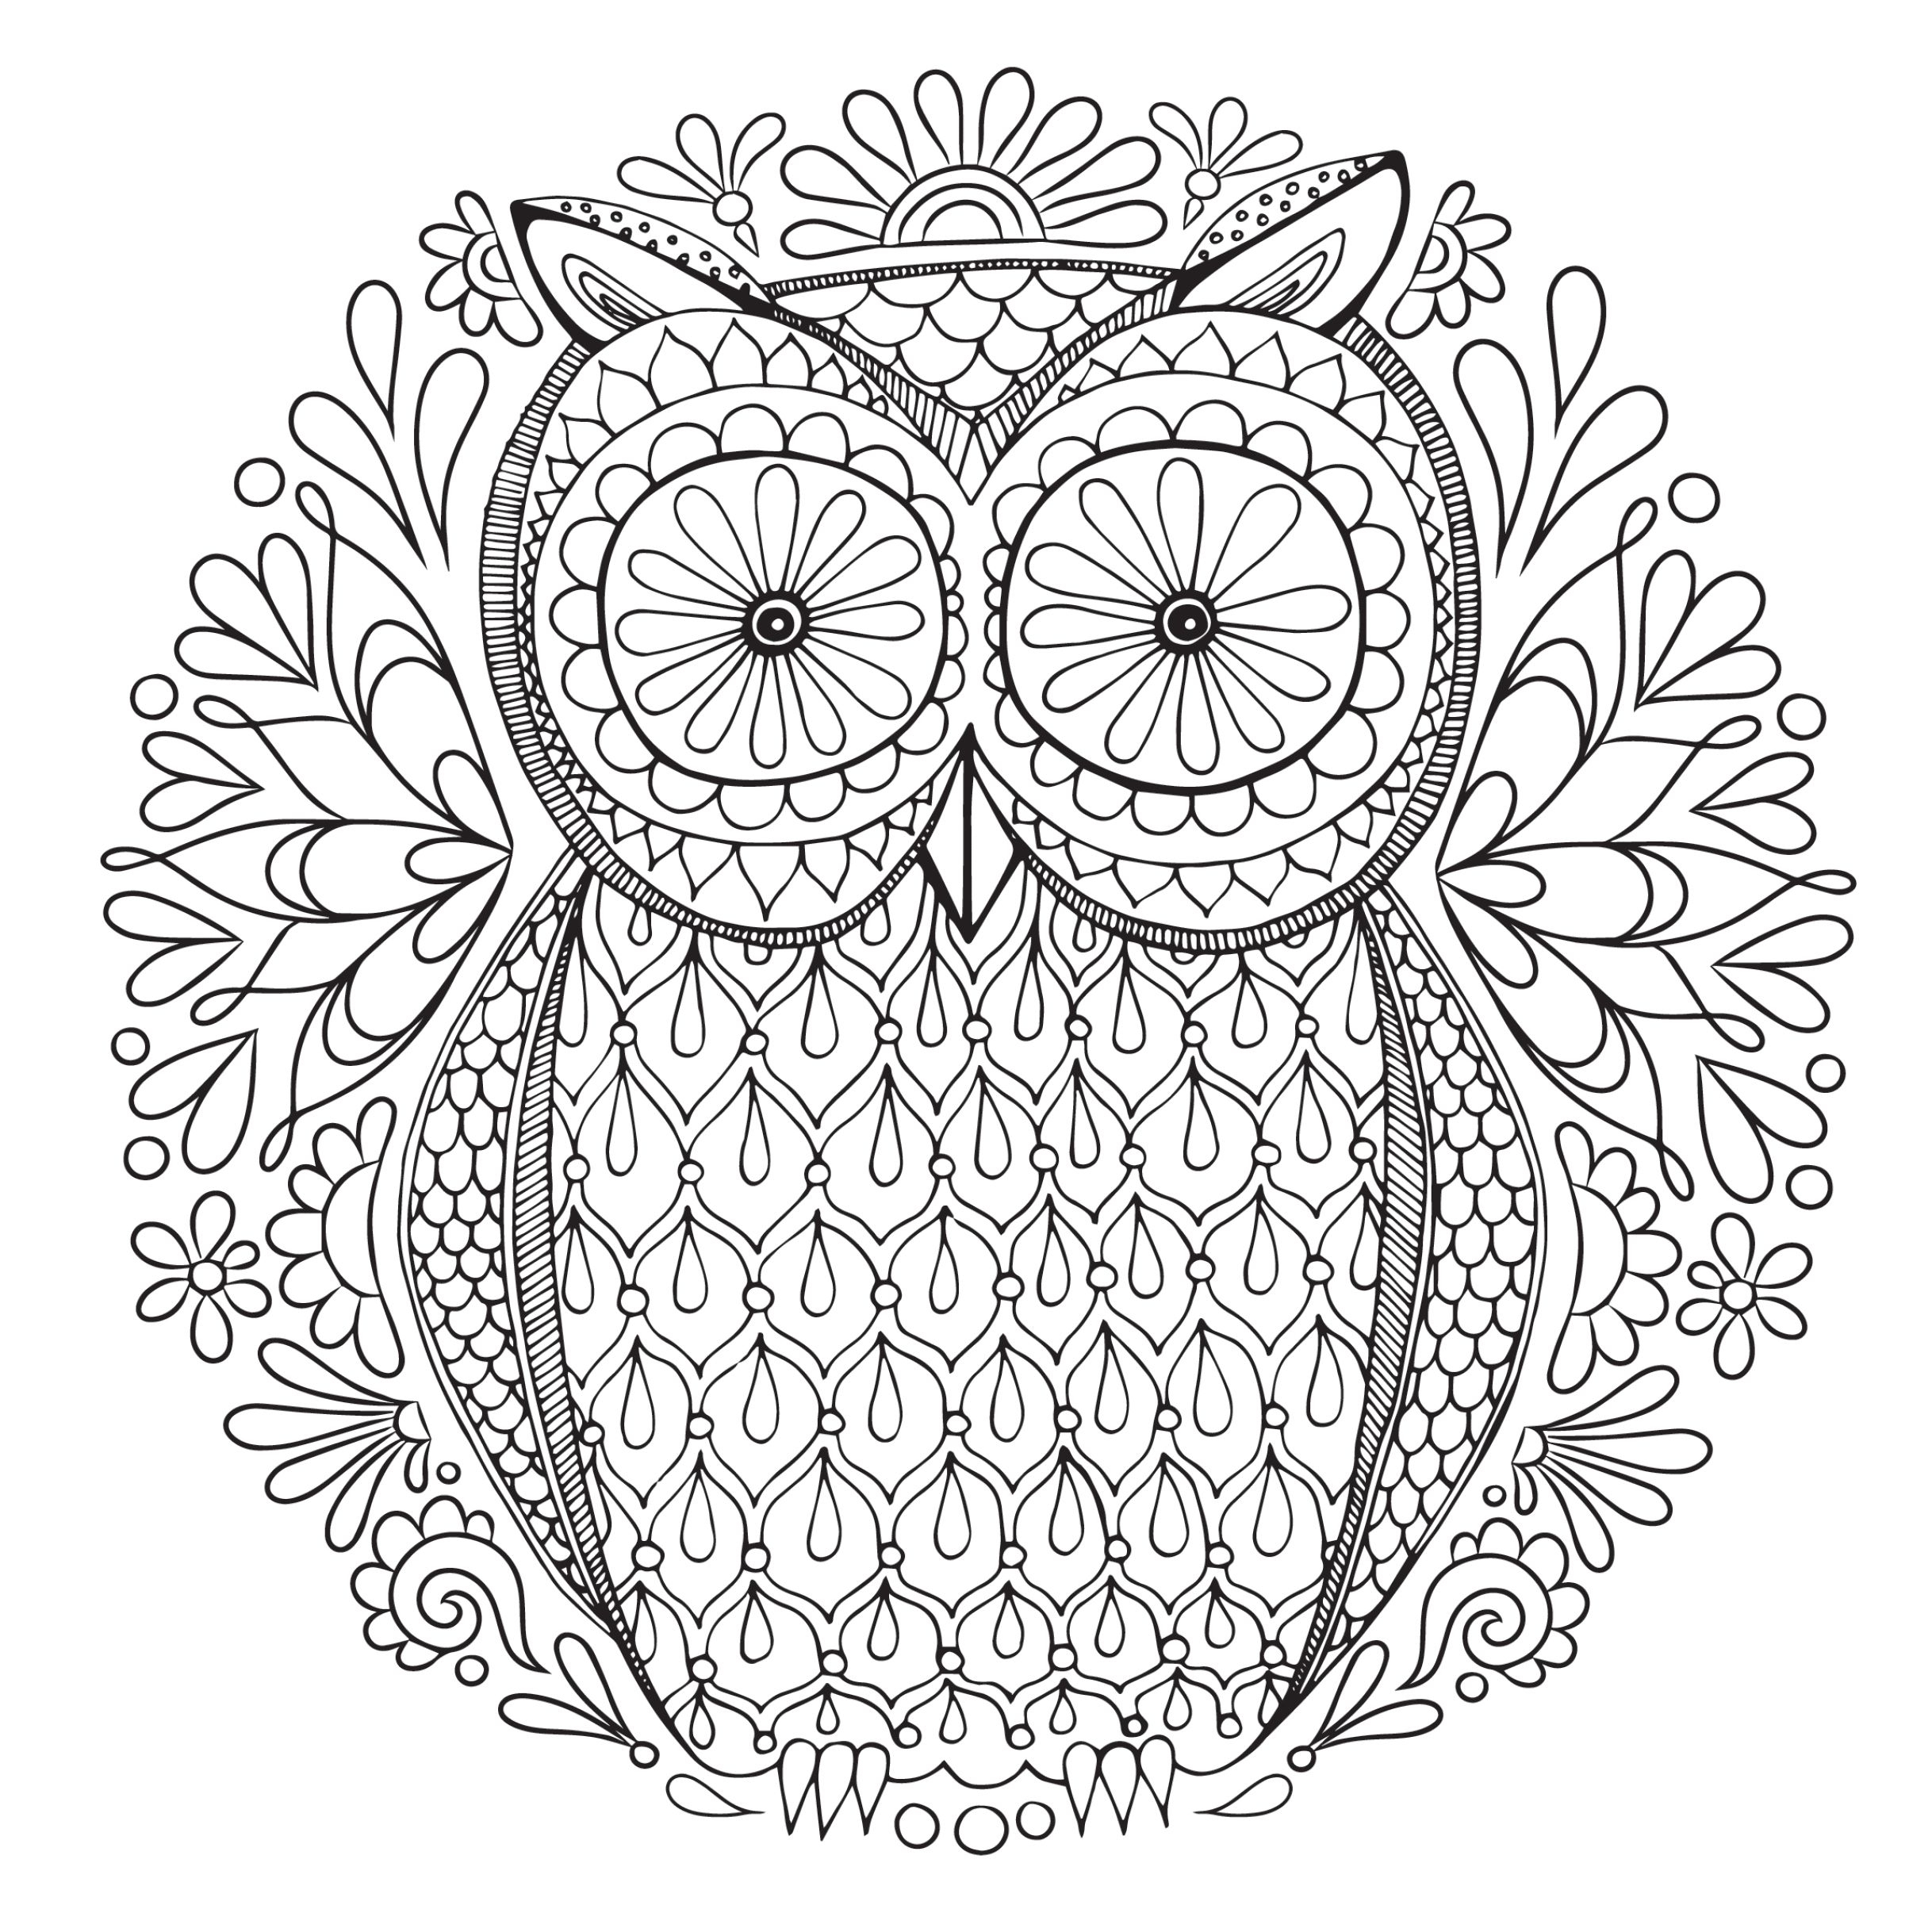 Free, Printable Coloring Pages For Adults - Free Printable Coloring Cards For Adults